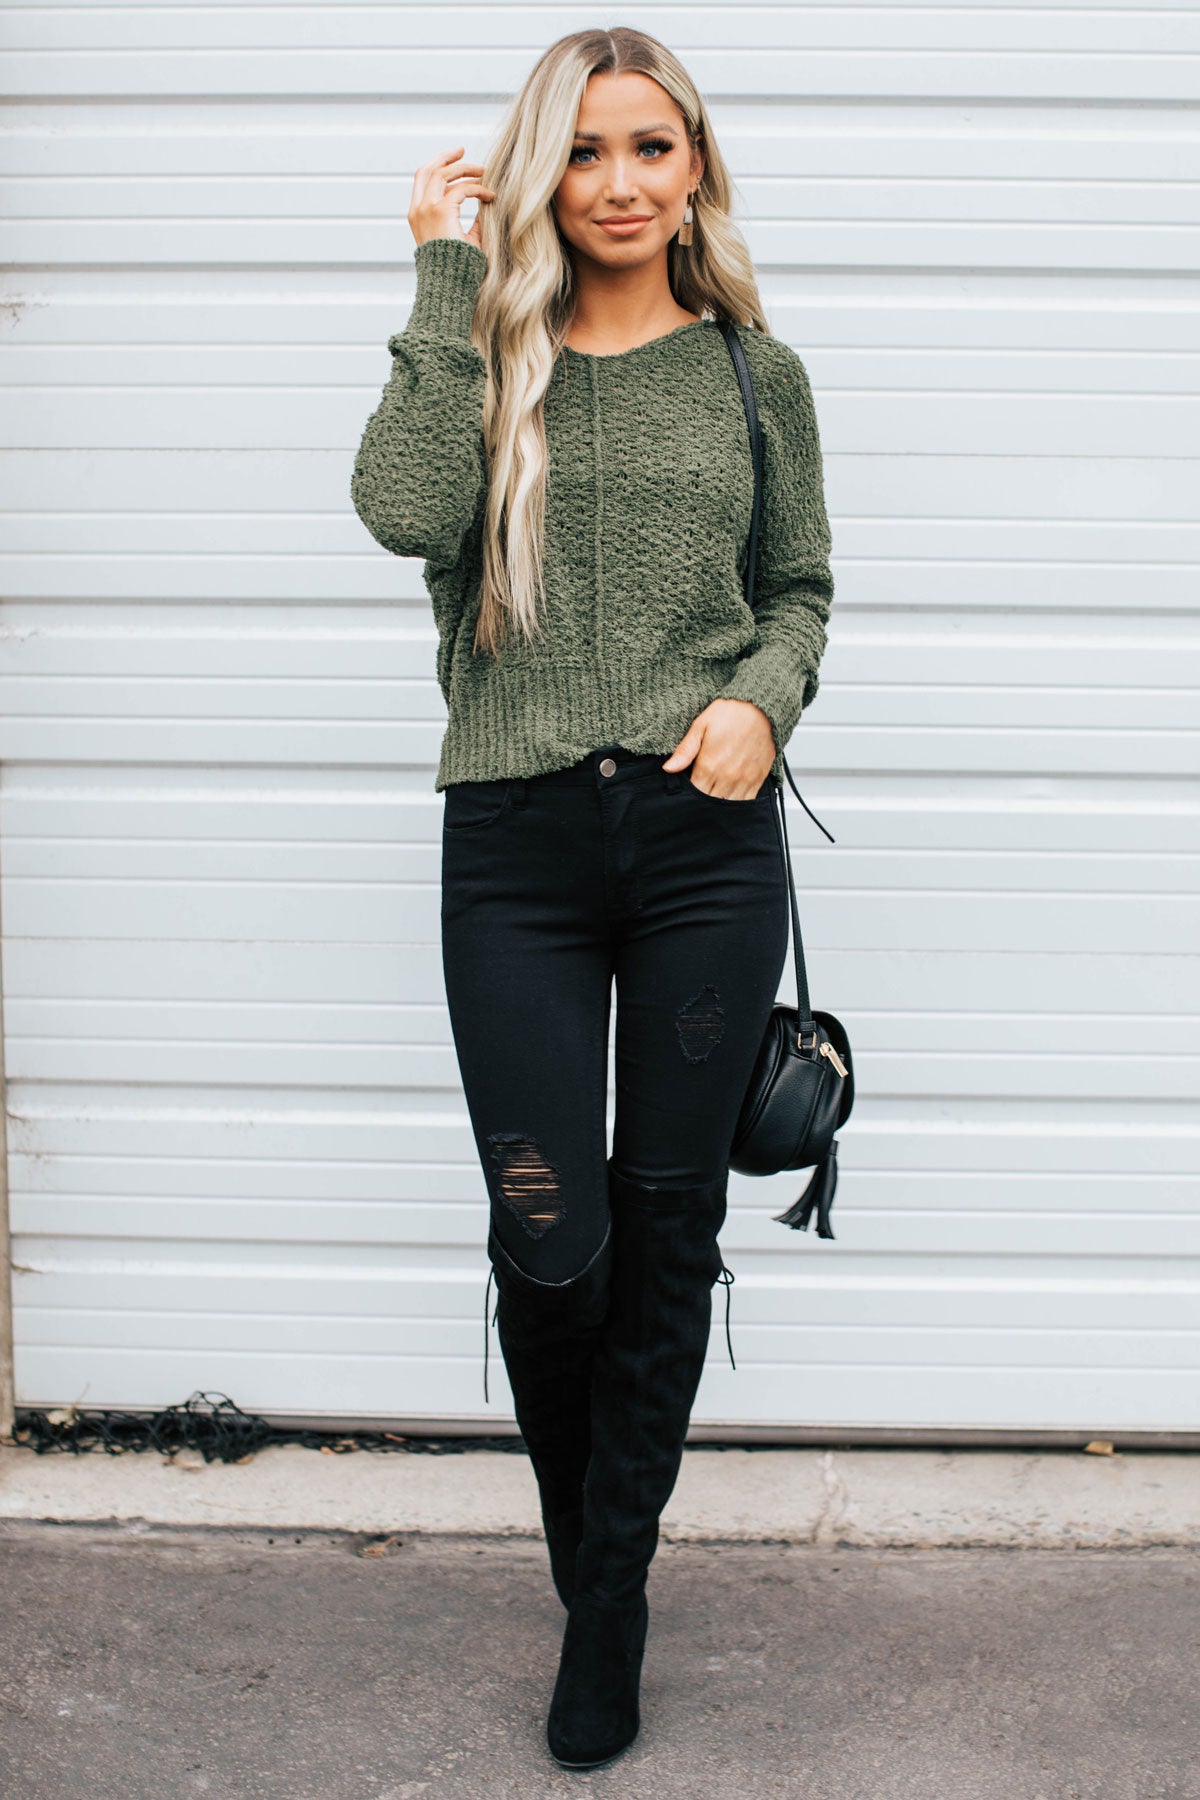 Fall Boutique Sweater with Long Sleeves